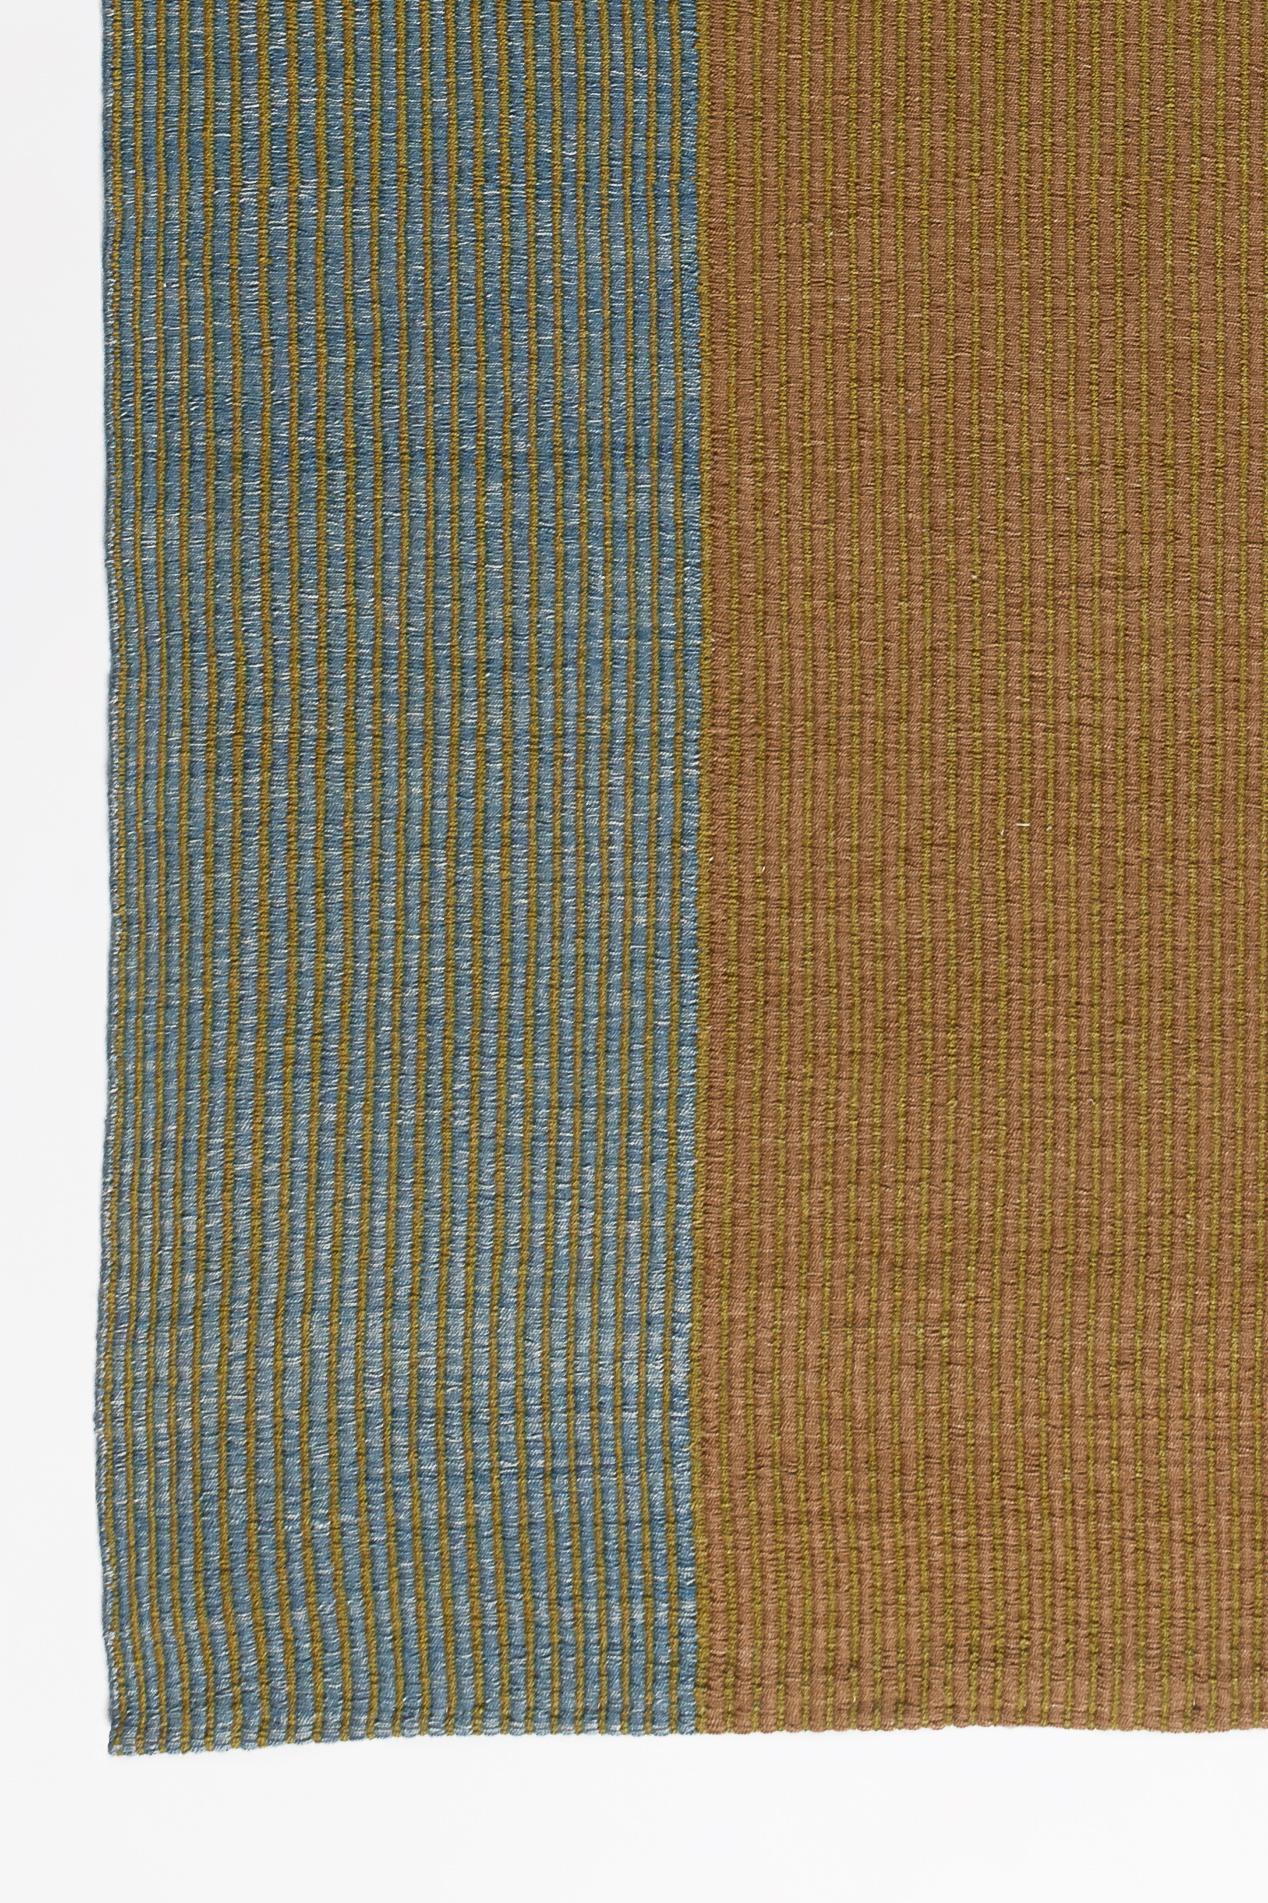 Haze is a contemporary Kilim rug collection inspired by the hazy view of landforms layered behind each other on a misty morning in Tuscany. 

Haze rugs have a unique corduroy texture. The subtle change in the thickness of the cords dissolves the